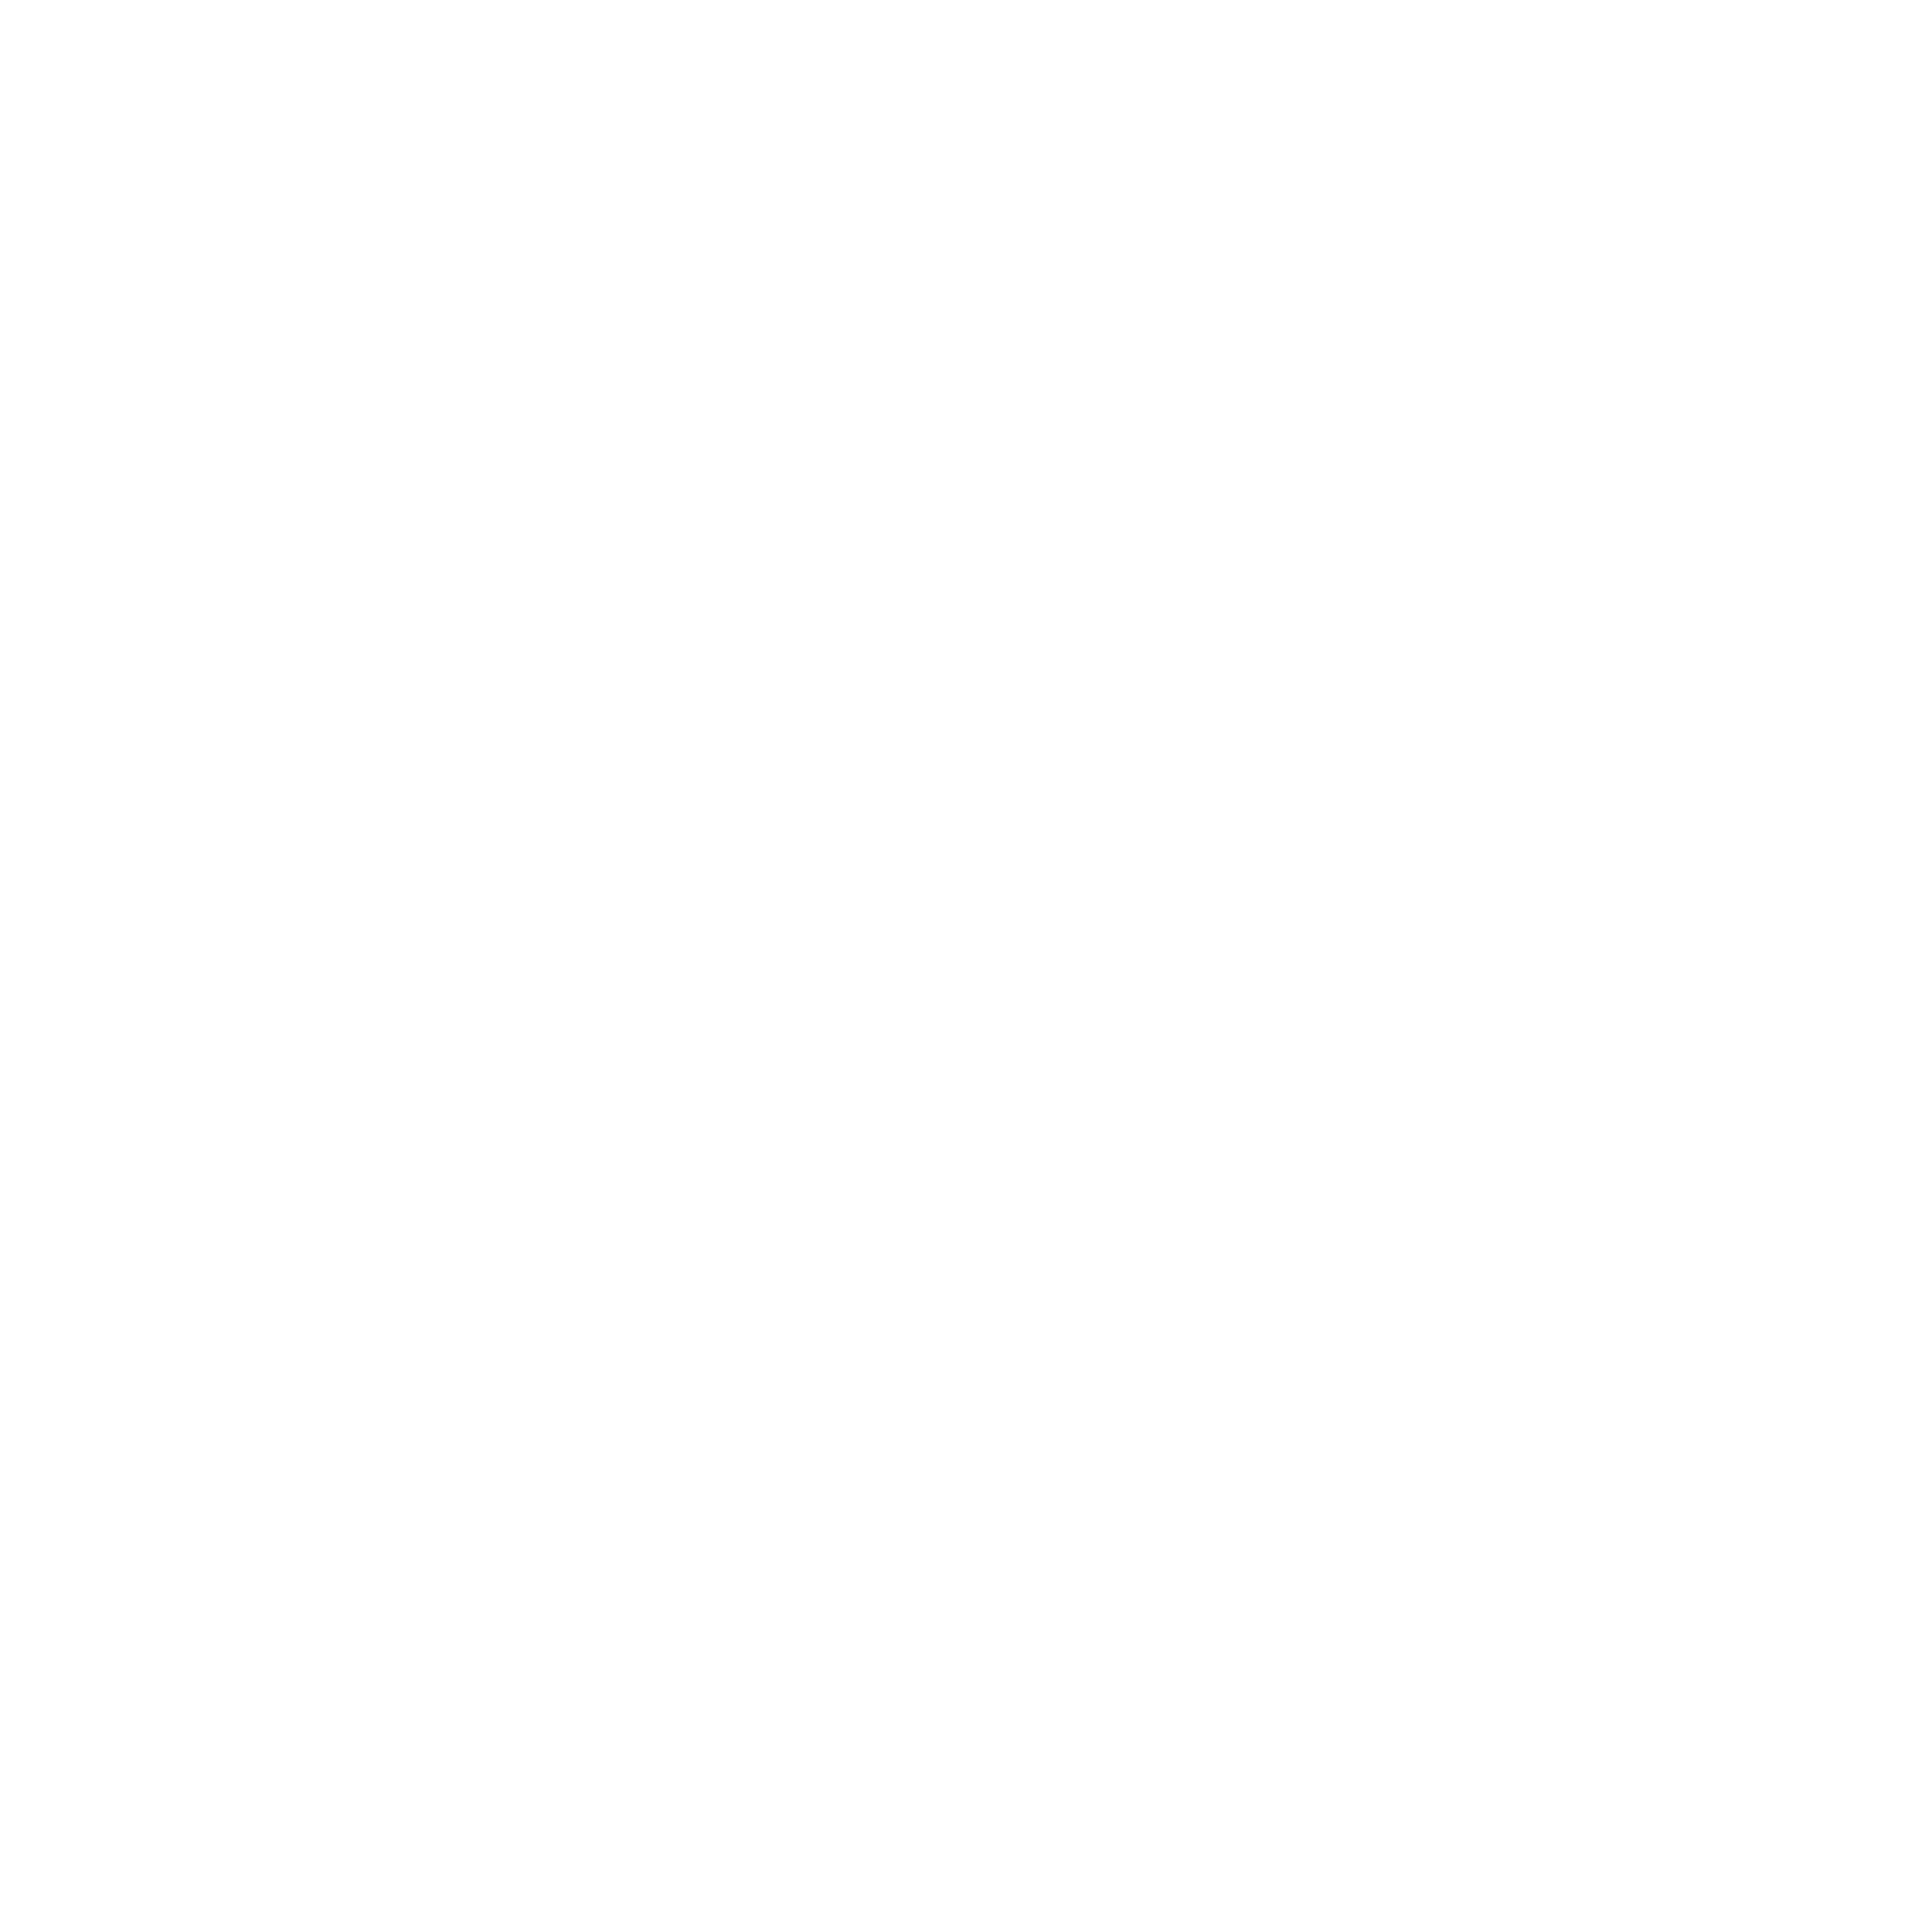 Magnum Research sights - XS Sights - night sights for magnum research